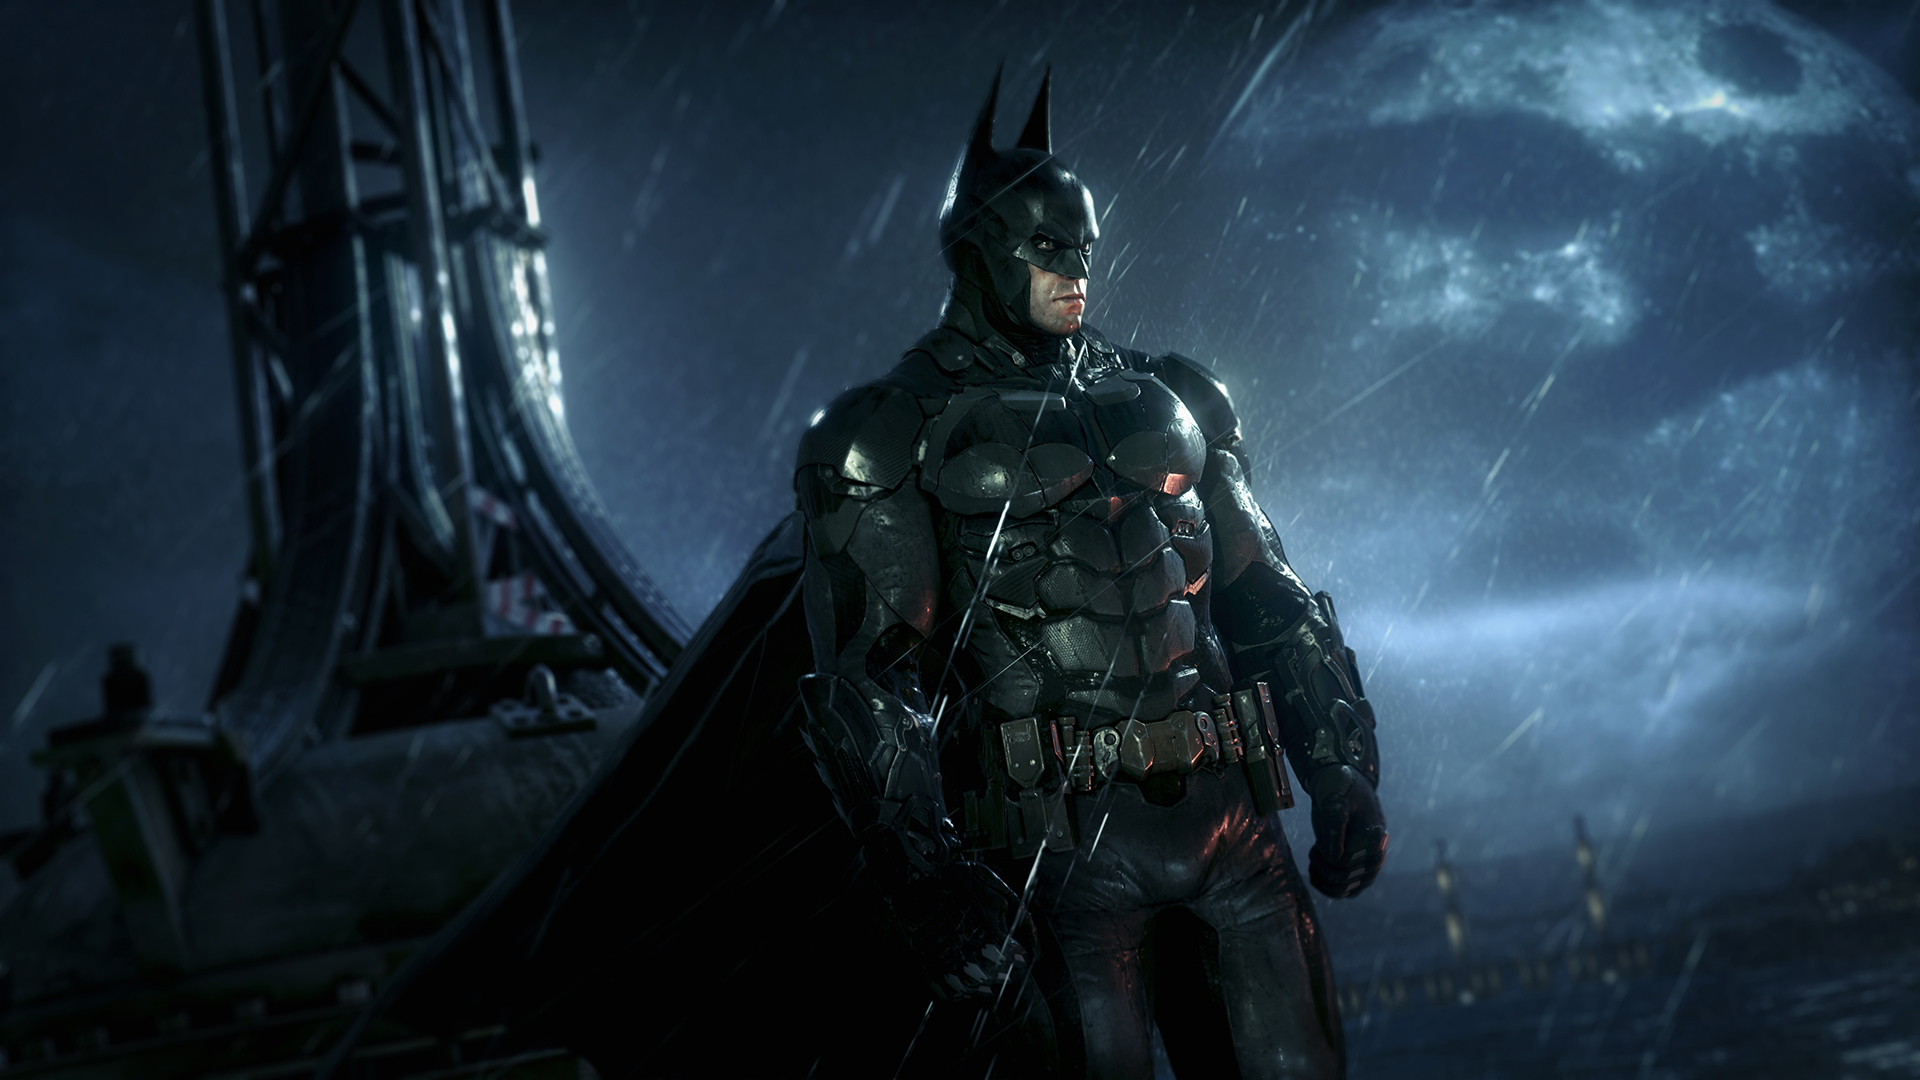 Showing Gallery For Batman Arkham Knight Iphone Wallpaper